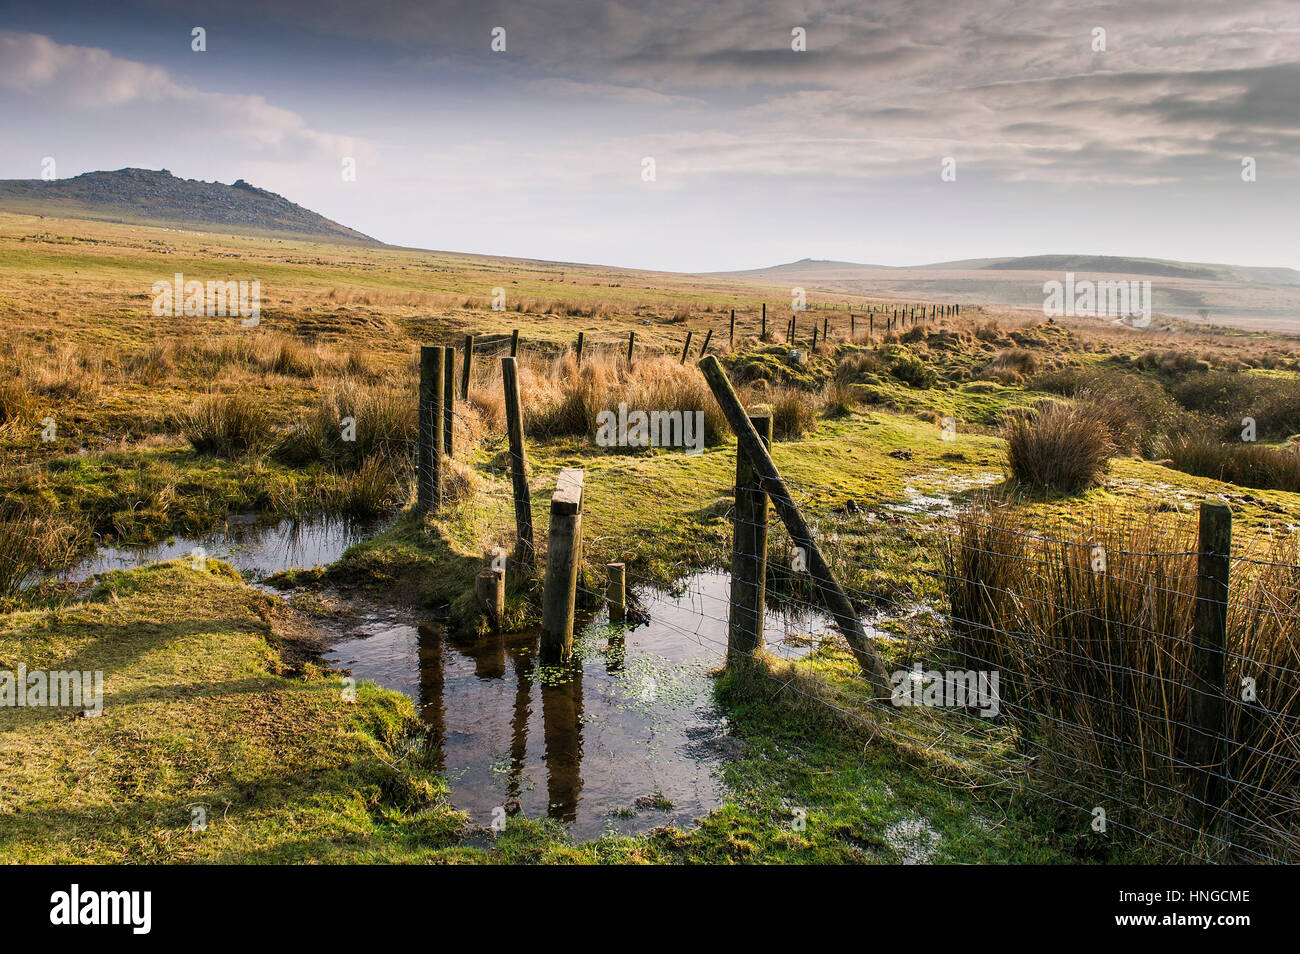 Marshy, waterlogged ground on Rough Tor, designated as an area of Outstanding Natural Beauty on Bodmin Moor in Cornwall. Stock Photo